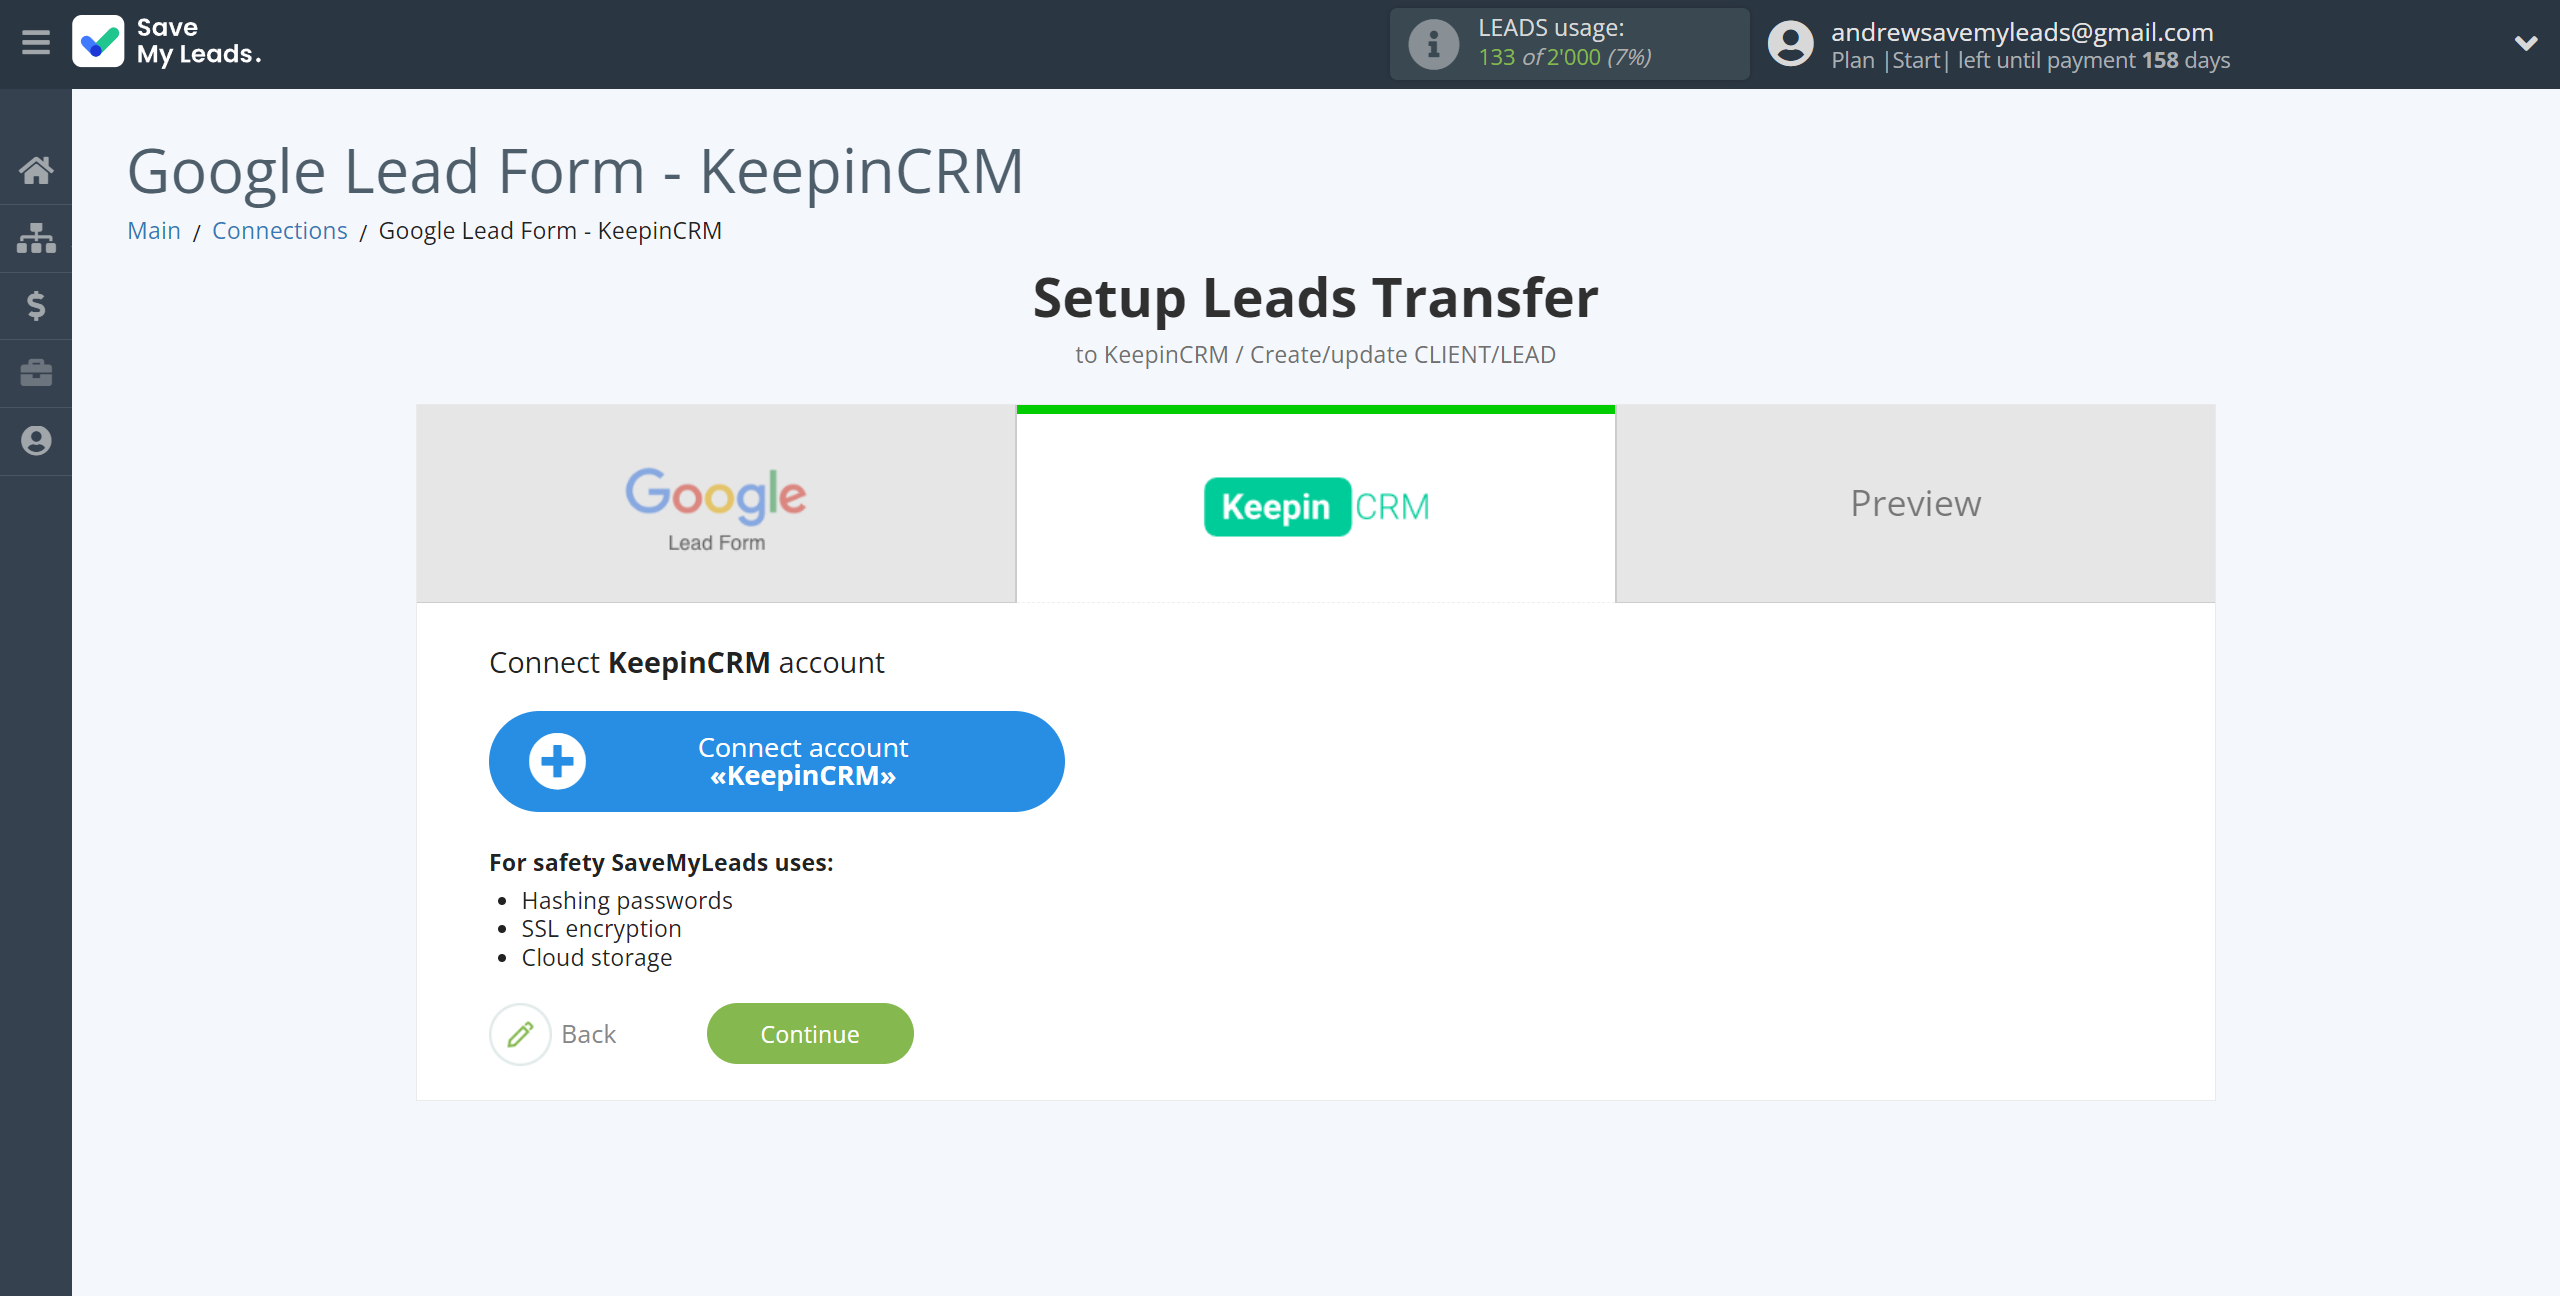 How to Connect Google Lead Form with KeepinCRM Create/update Client/Lead | Data Destination account connection